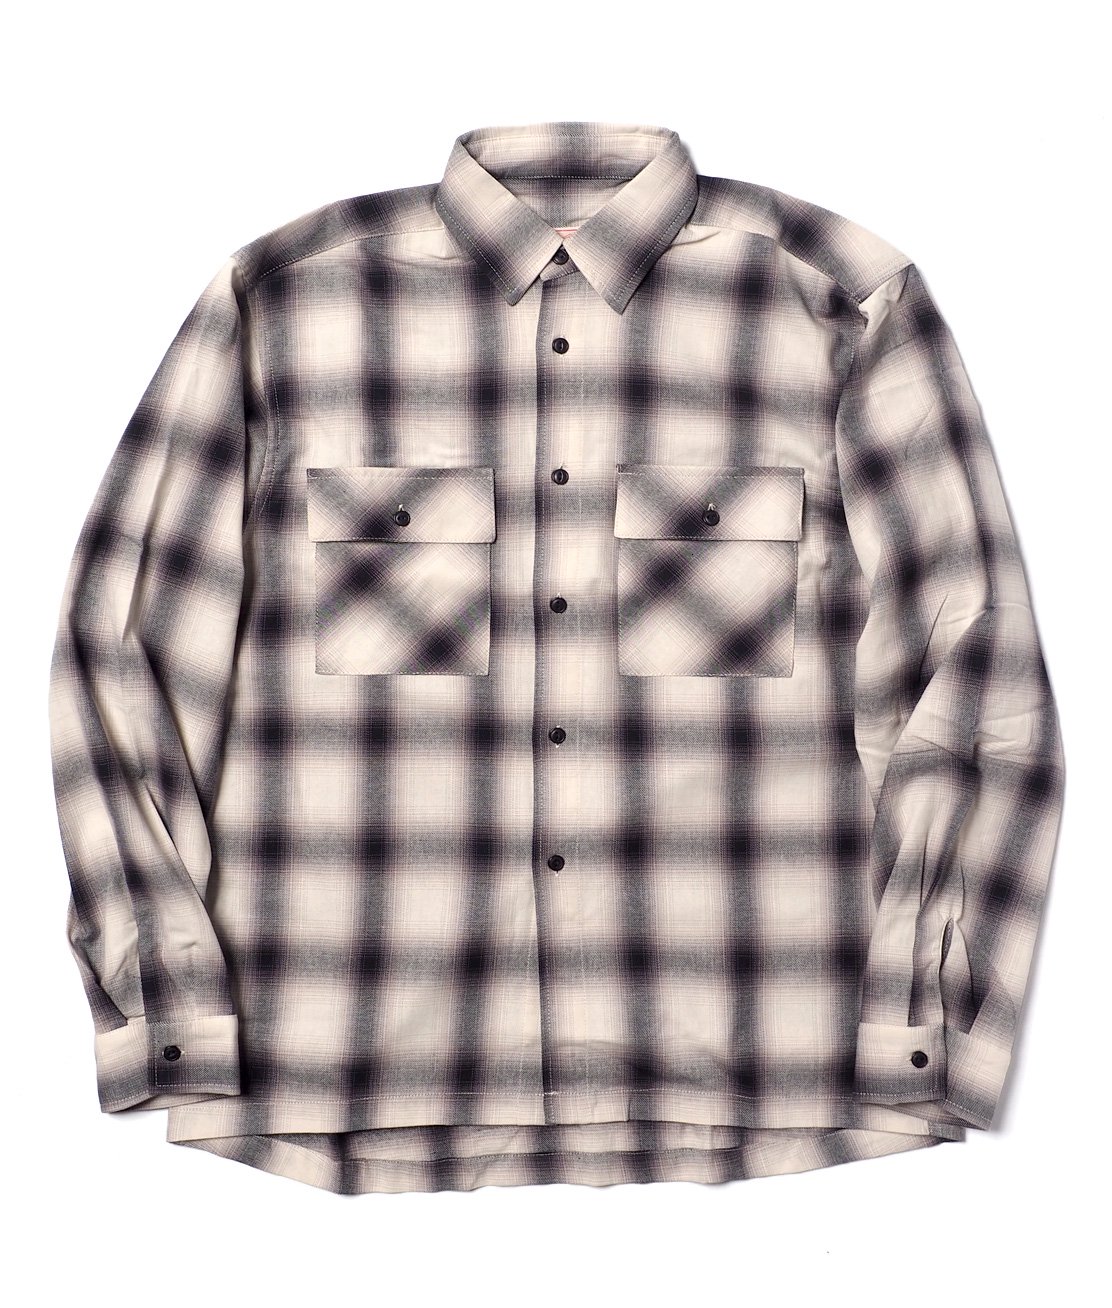 BIG MIKE】OMBRE LIGHT FLANNEL SHIRT - WHITE/NAVY ビッグマイク